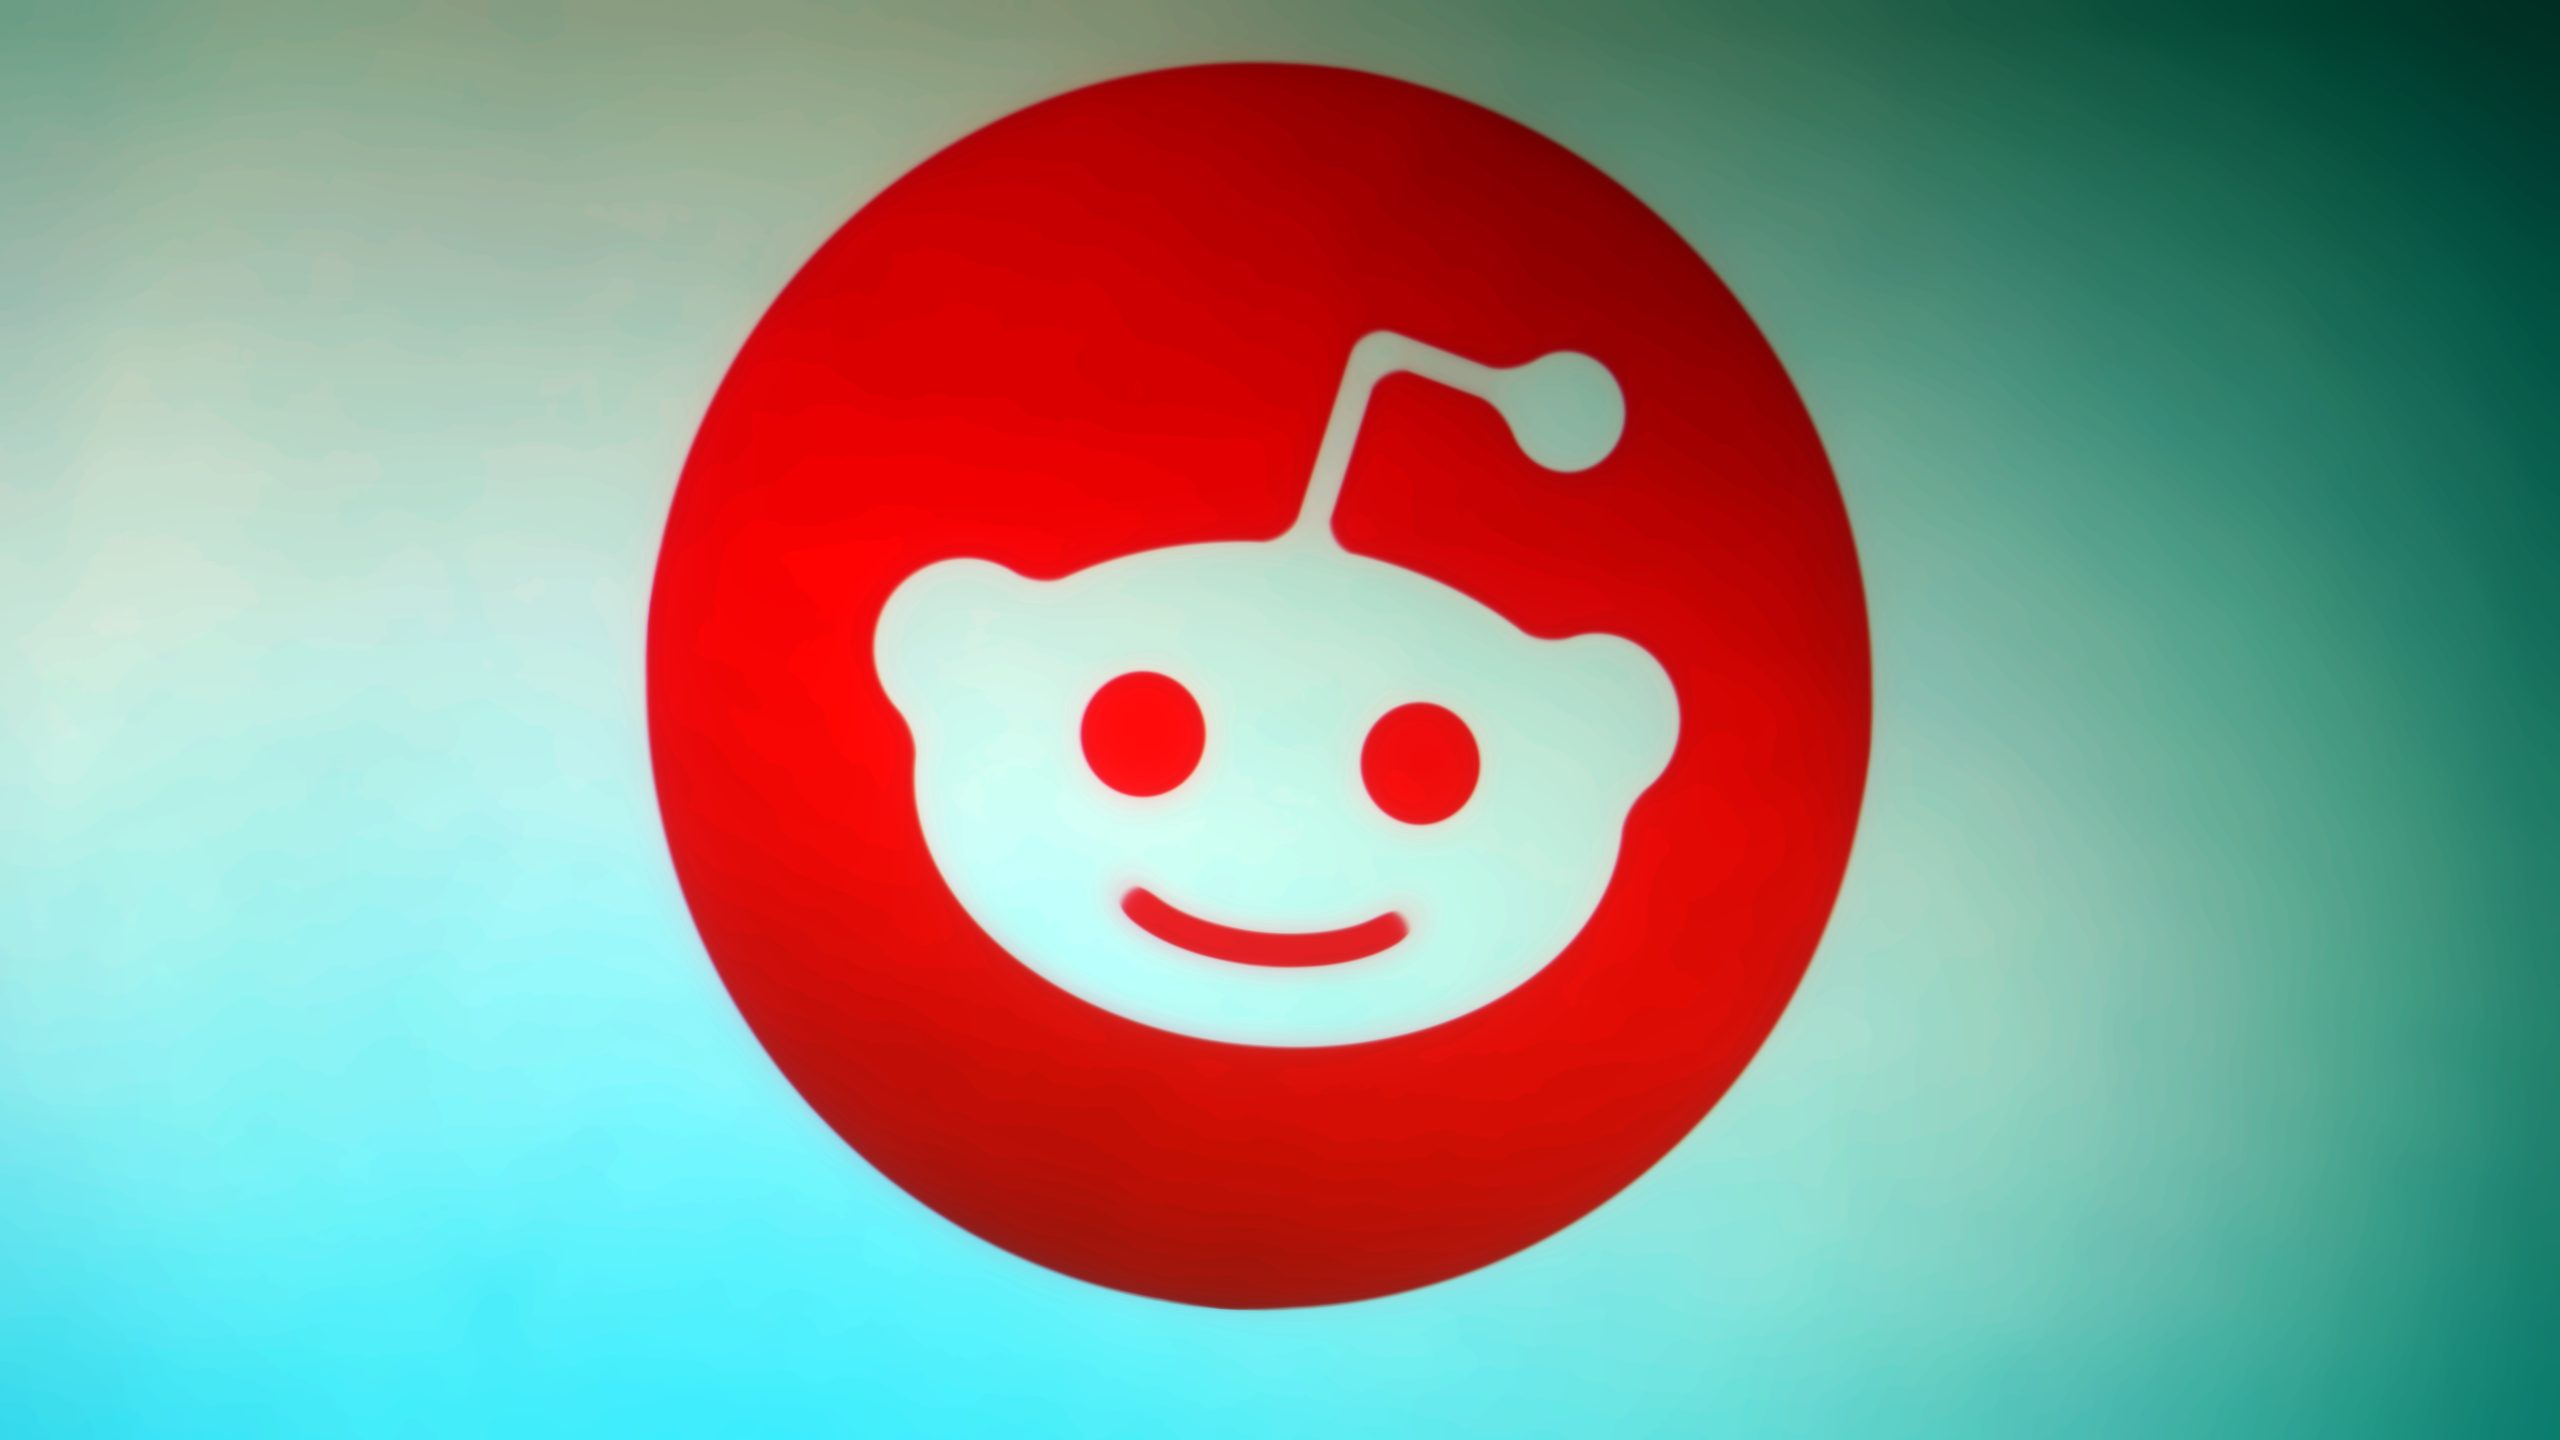 Movie studios: Reddit should have to identify users who have discussed piracy